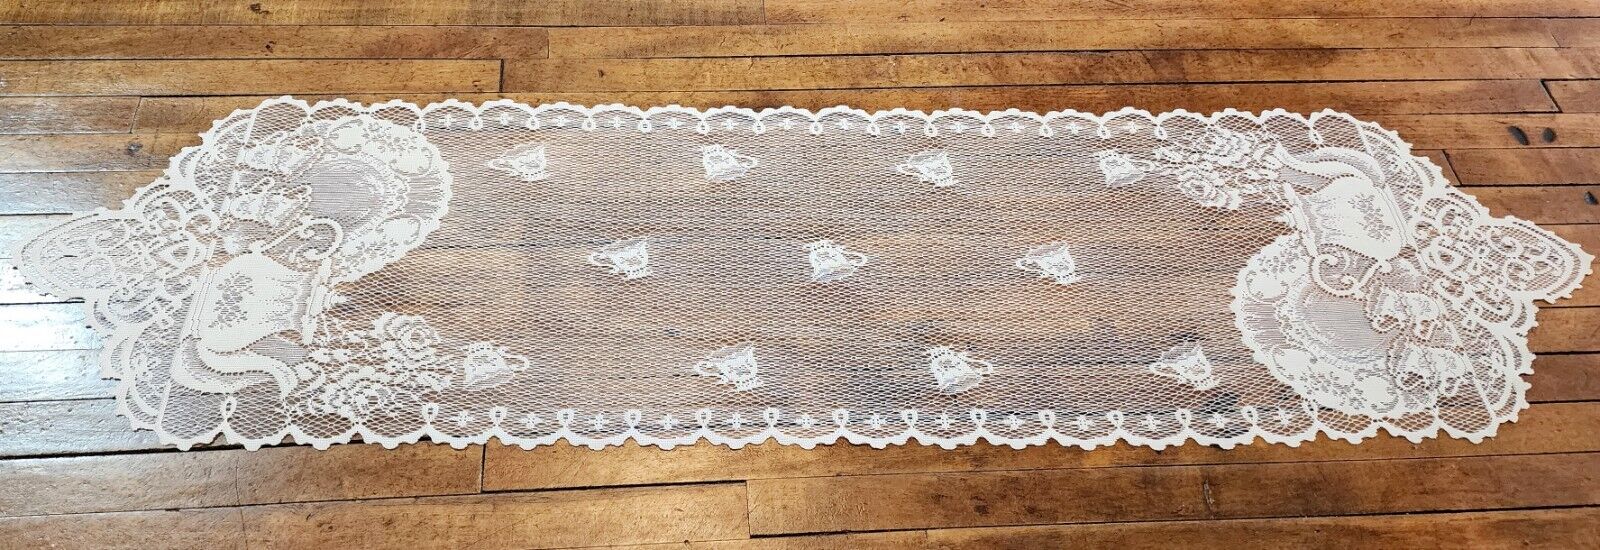 Vintage Elegant Ivory Net Lace Table Runner  12 x 48 inch Tea Pots and Cups